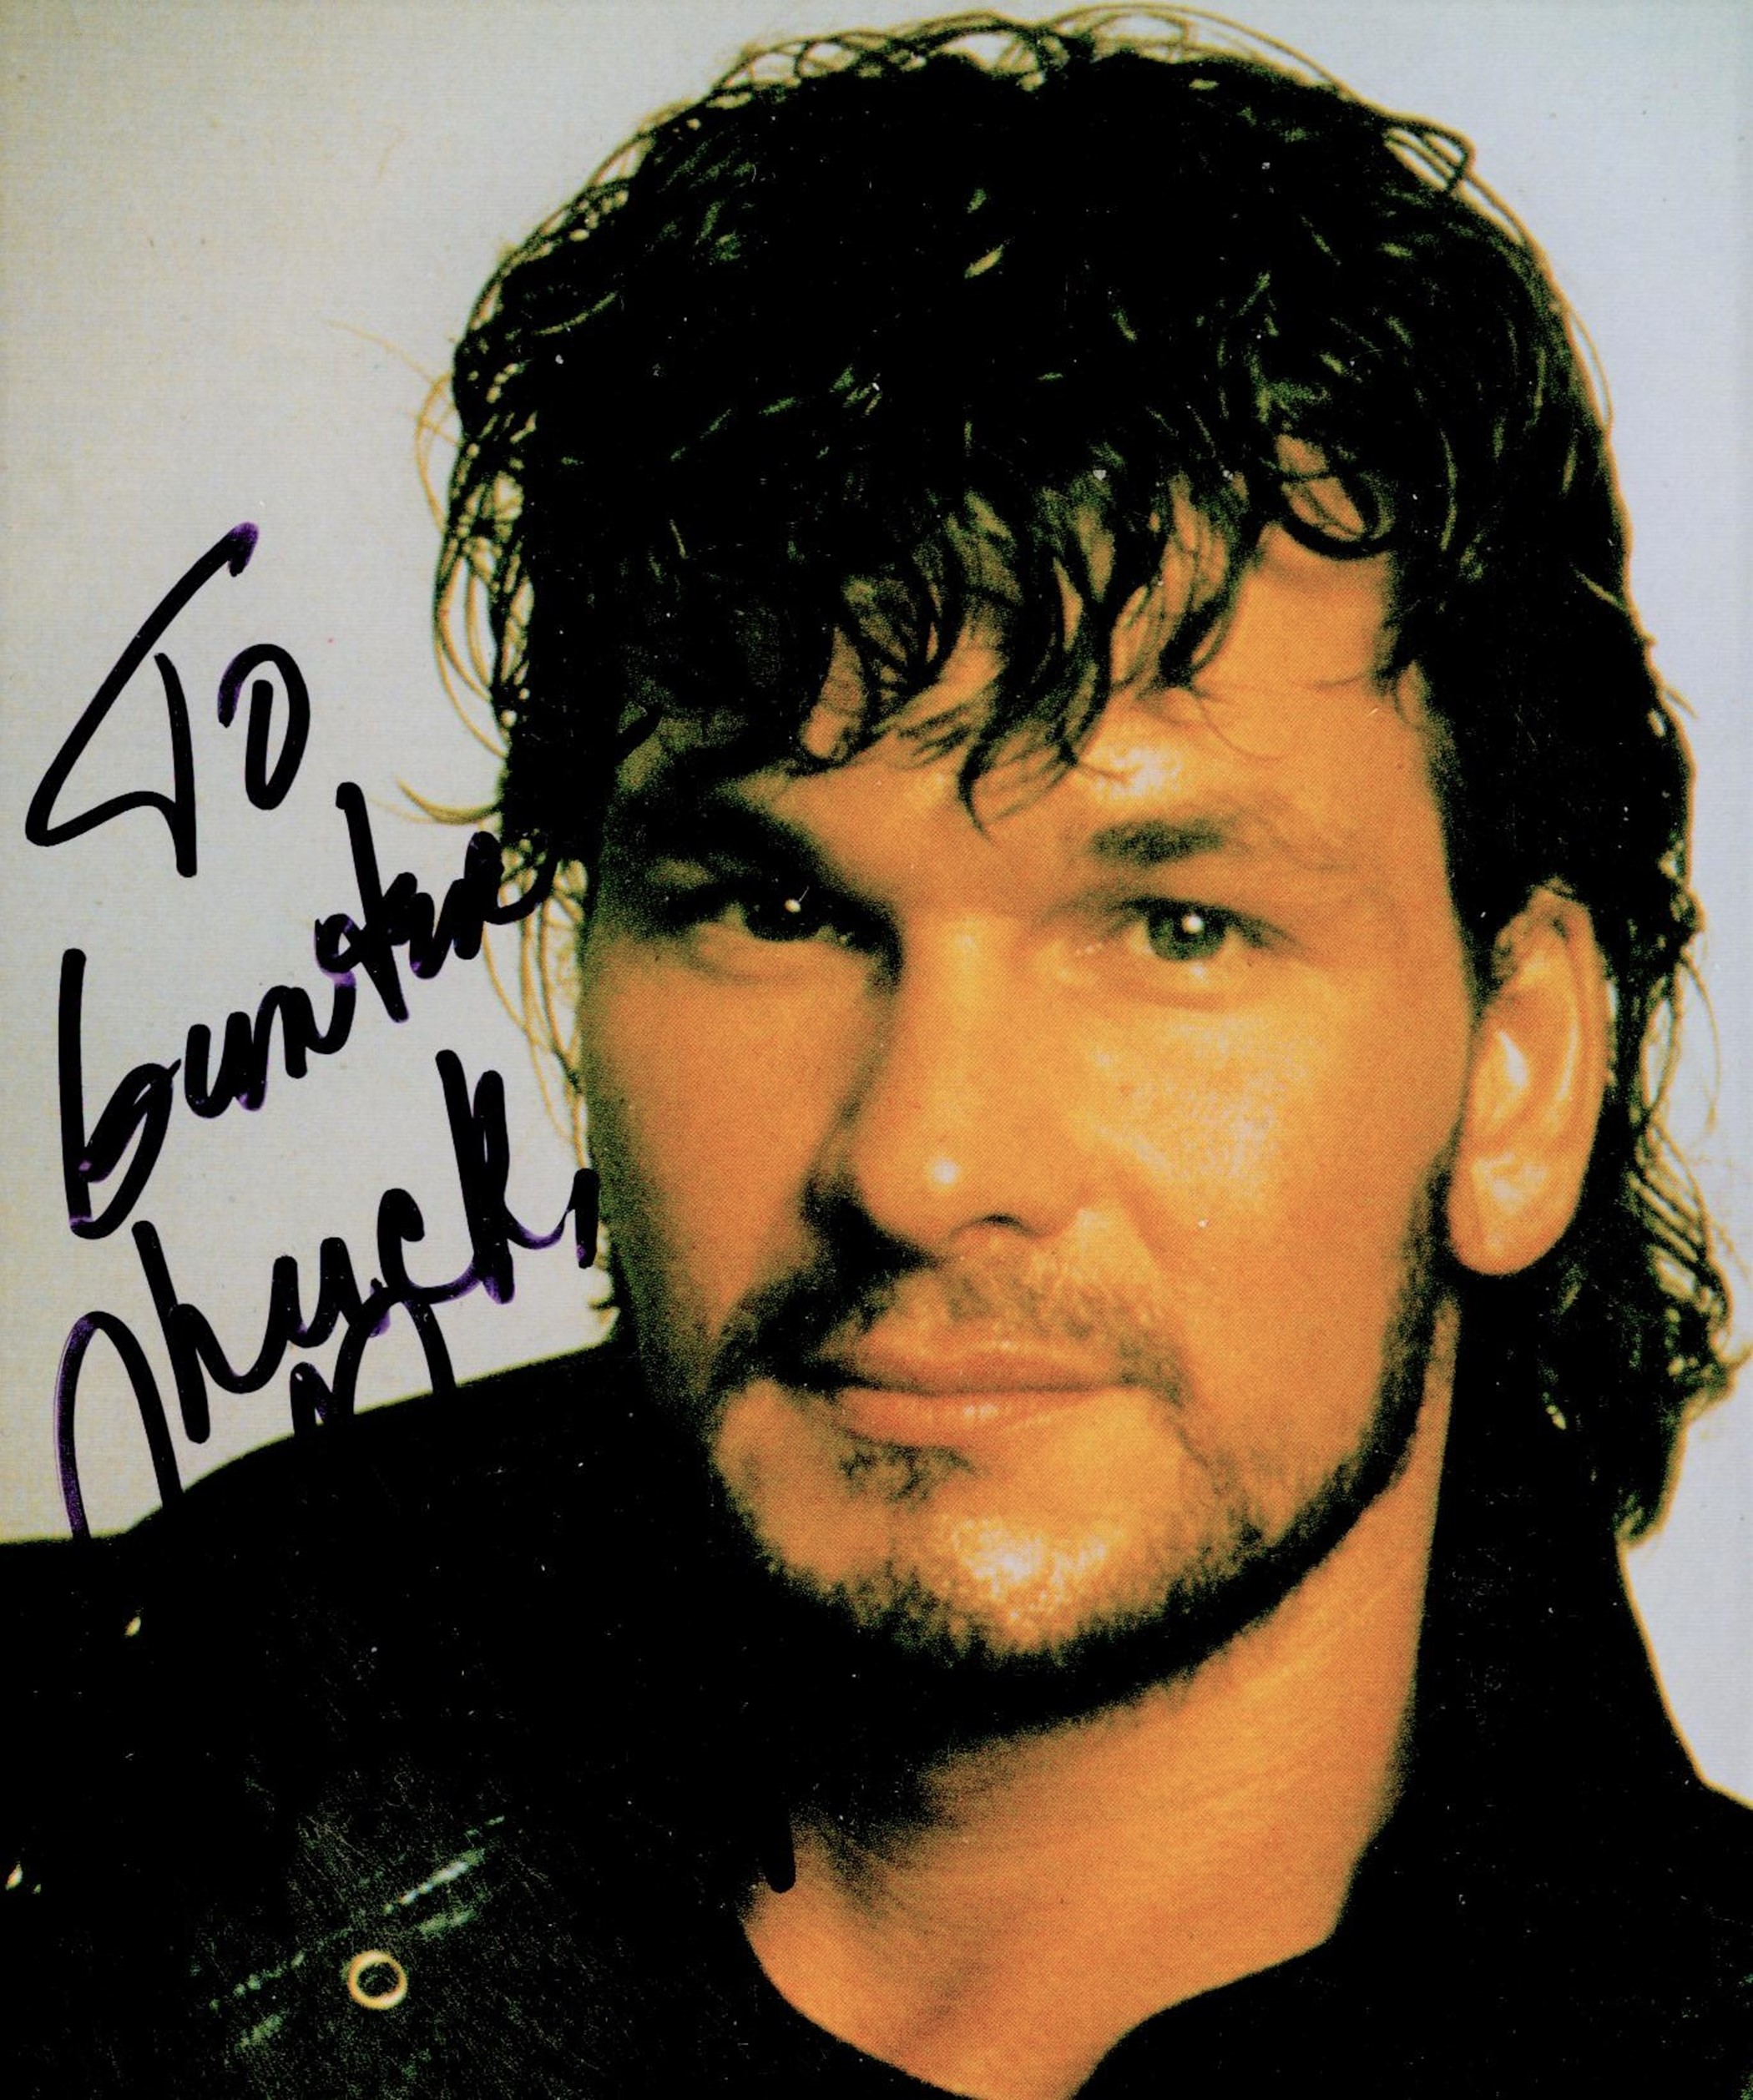 Patrick Swayze signed 7x5 colour photo dedicated. Good condition. All autographs come with a